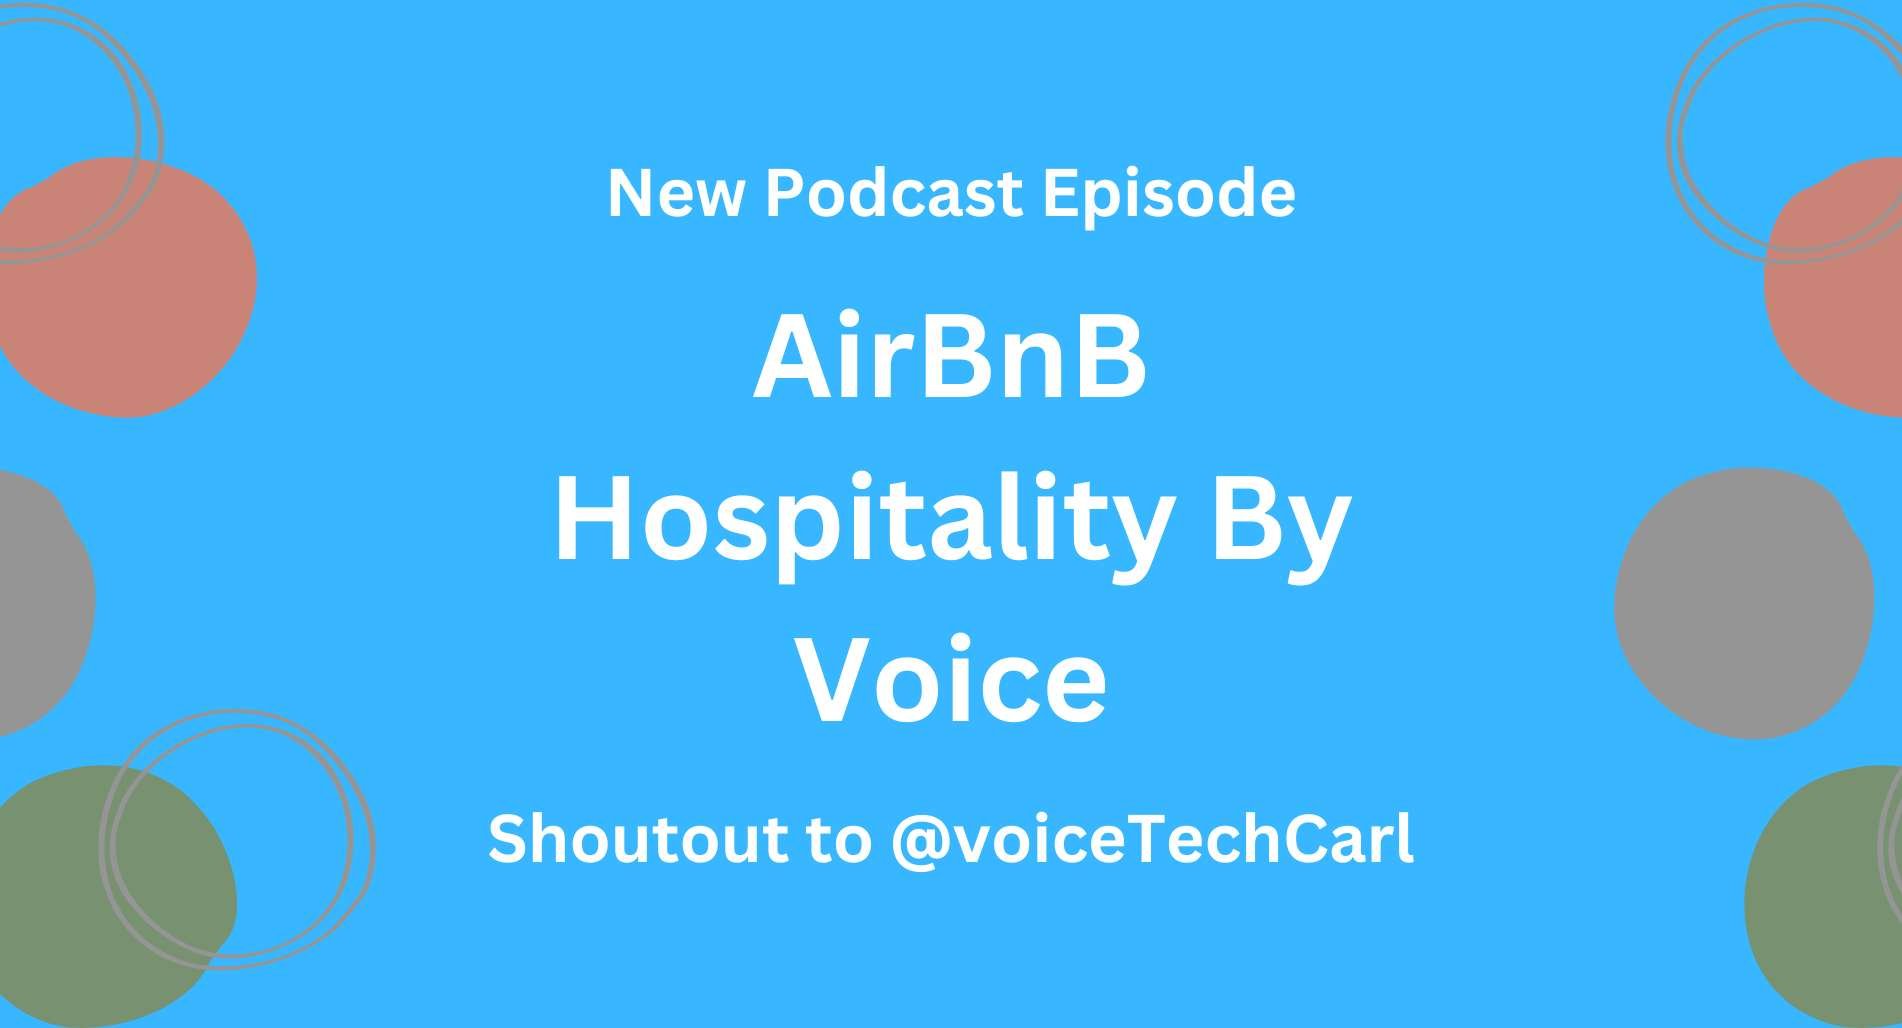 AirBnB Hospitality by Voice - a Podcast Episode on Carl Robinsons Voice Tech Podcast